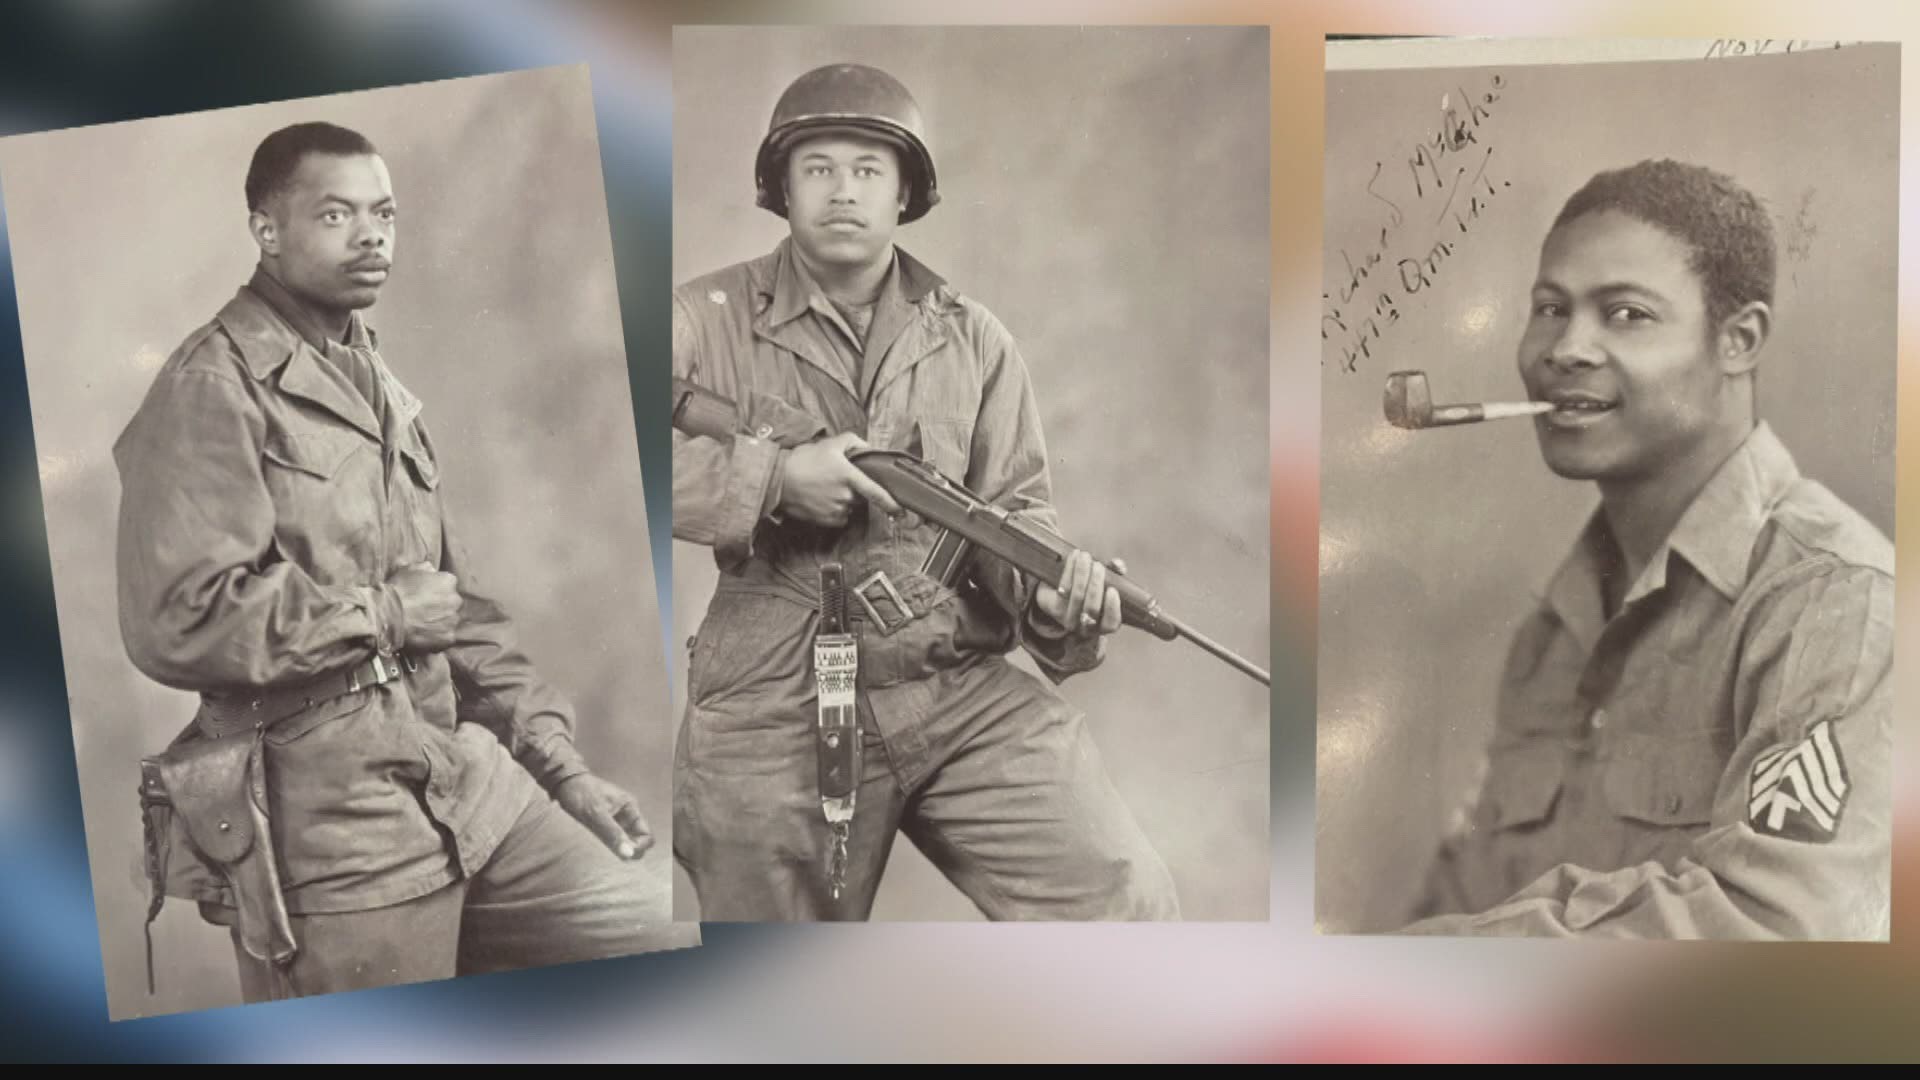 A historic find at a local Goodwill store hopes to bring military heroes home to their families.